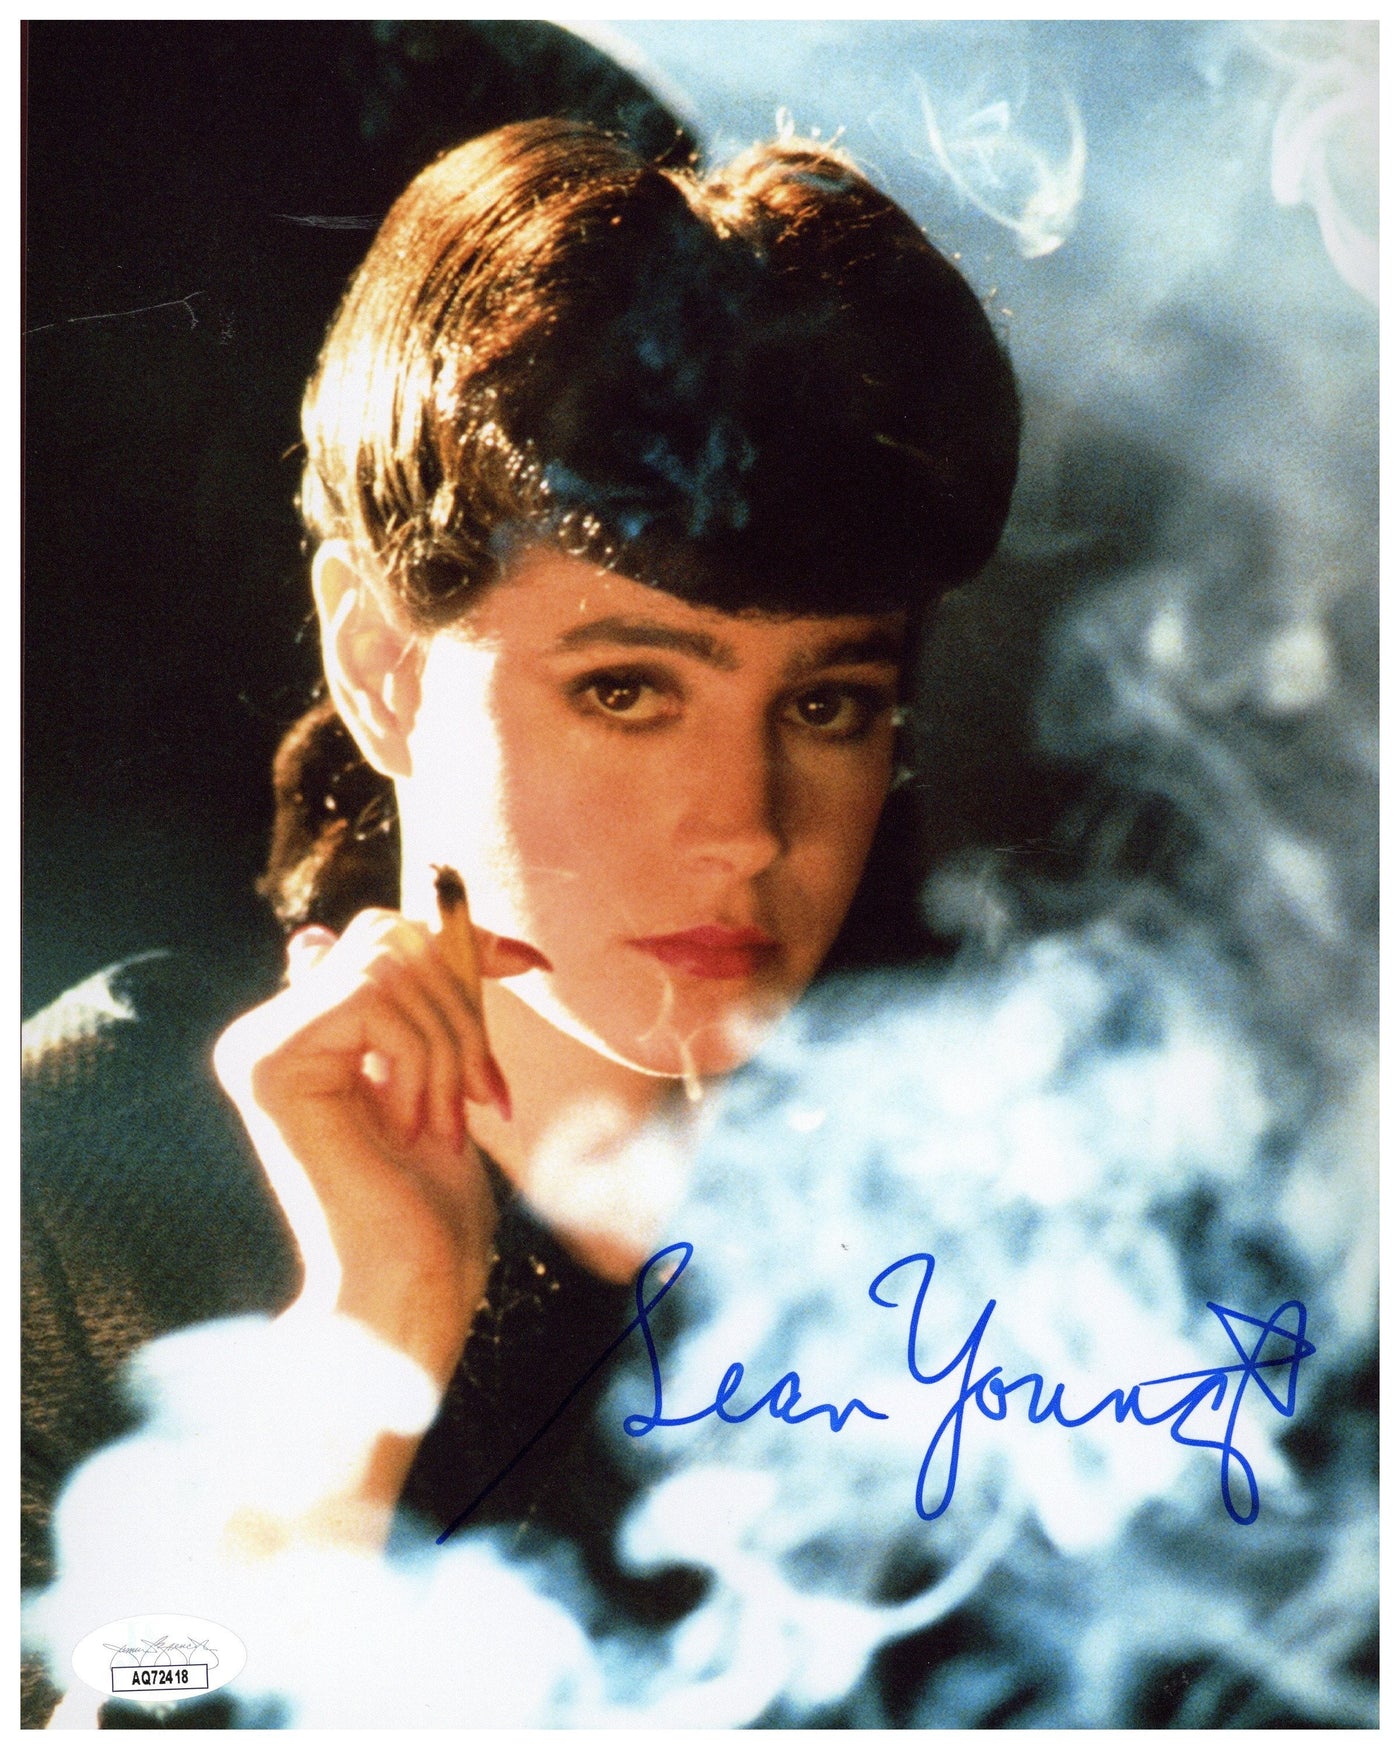 Sean Young Signed 8x10 Photo Blade Runner Authentic Autographed JSA COA